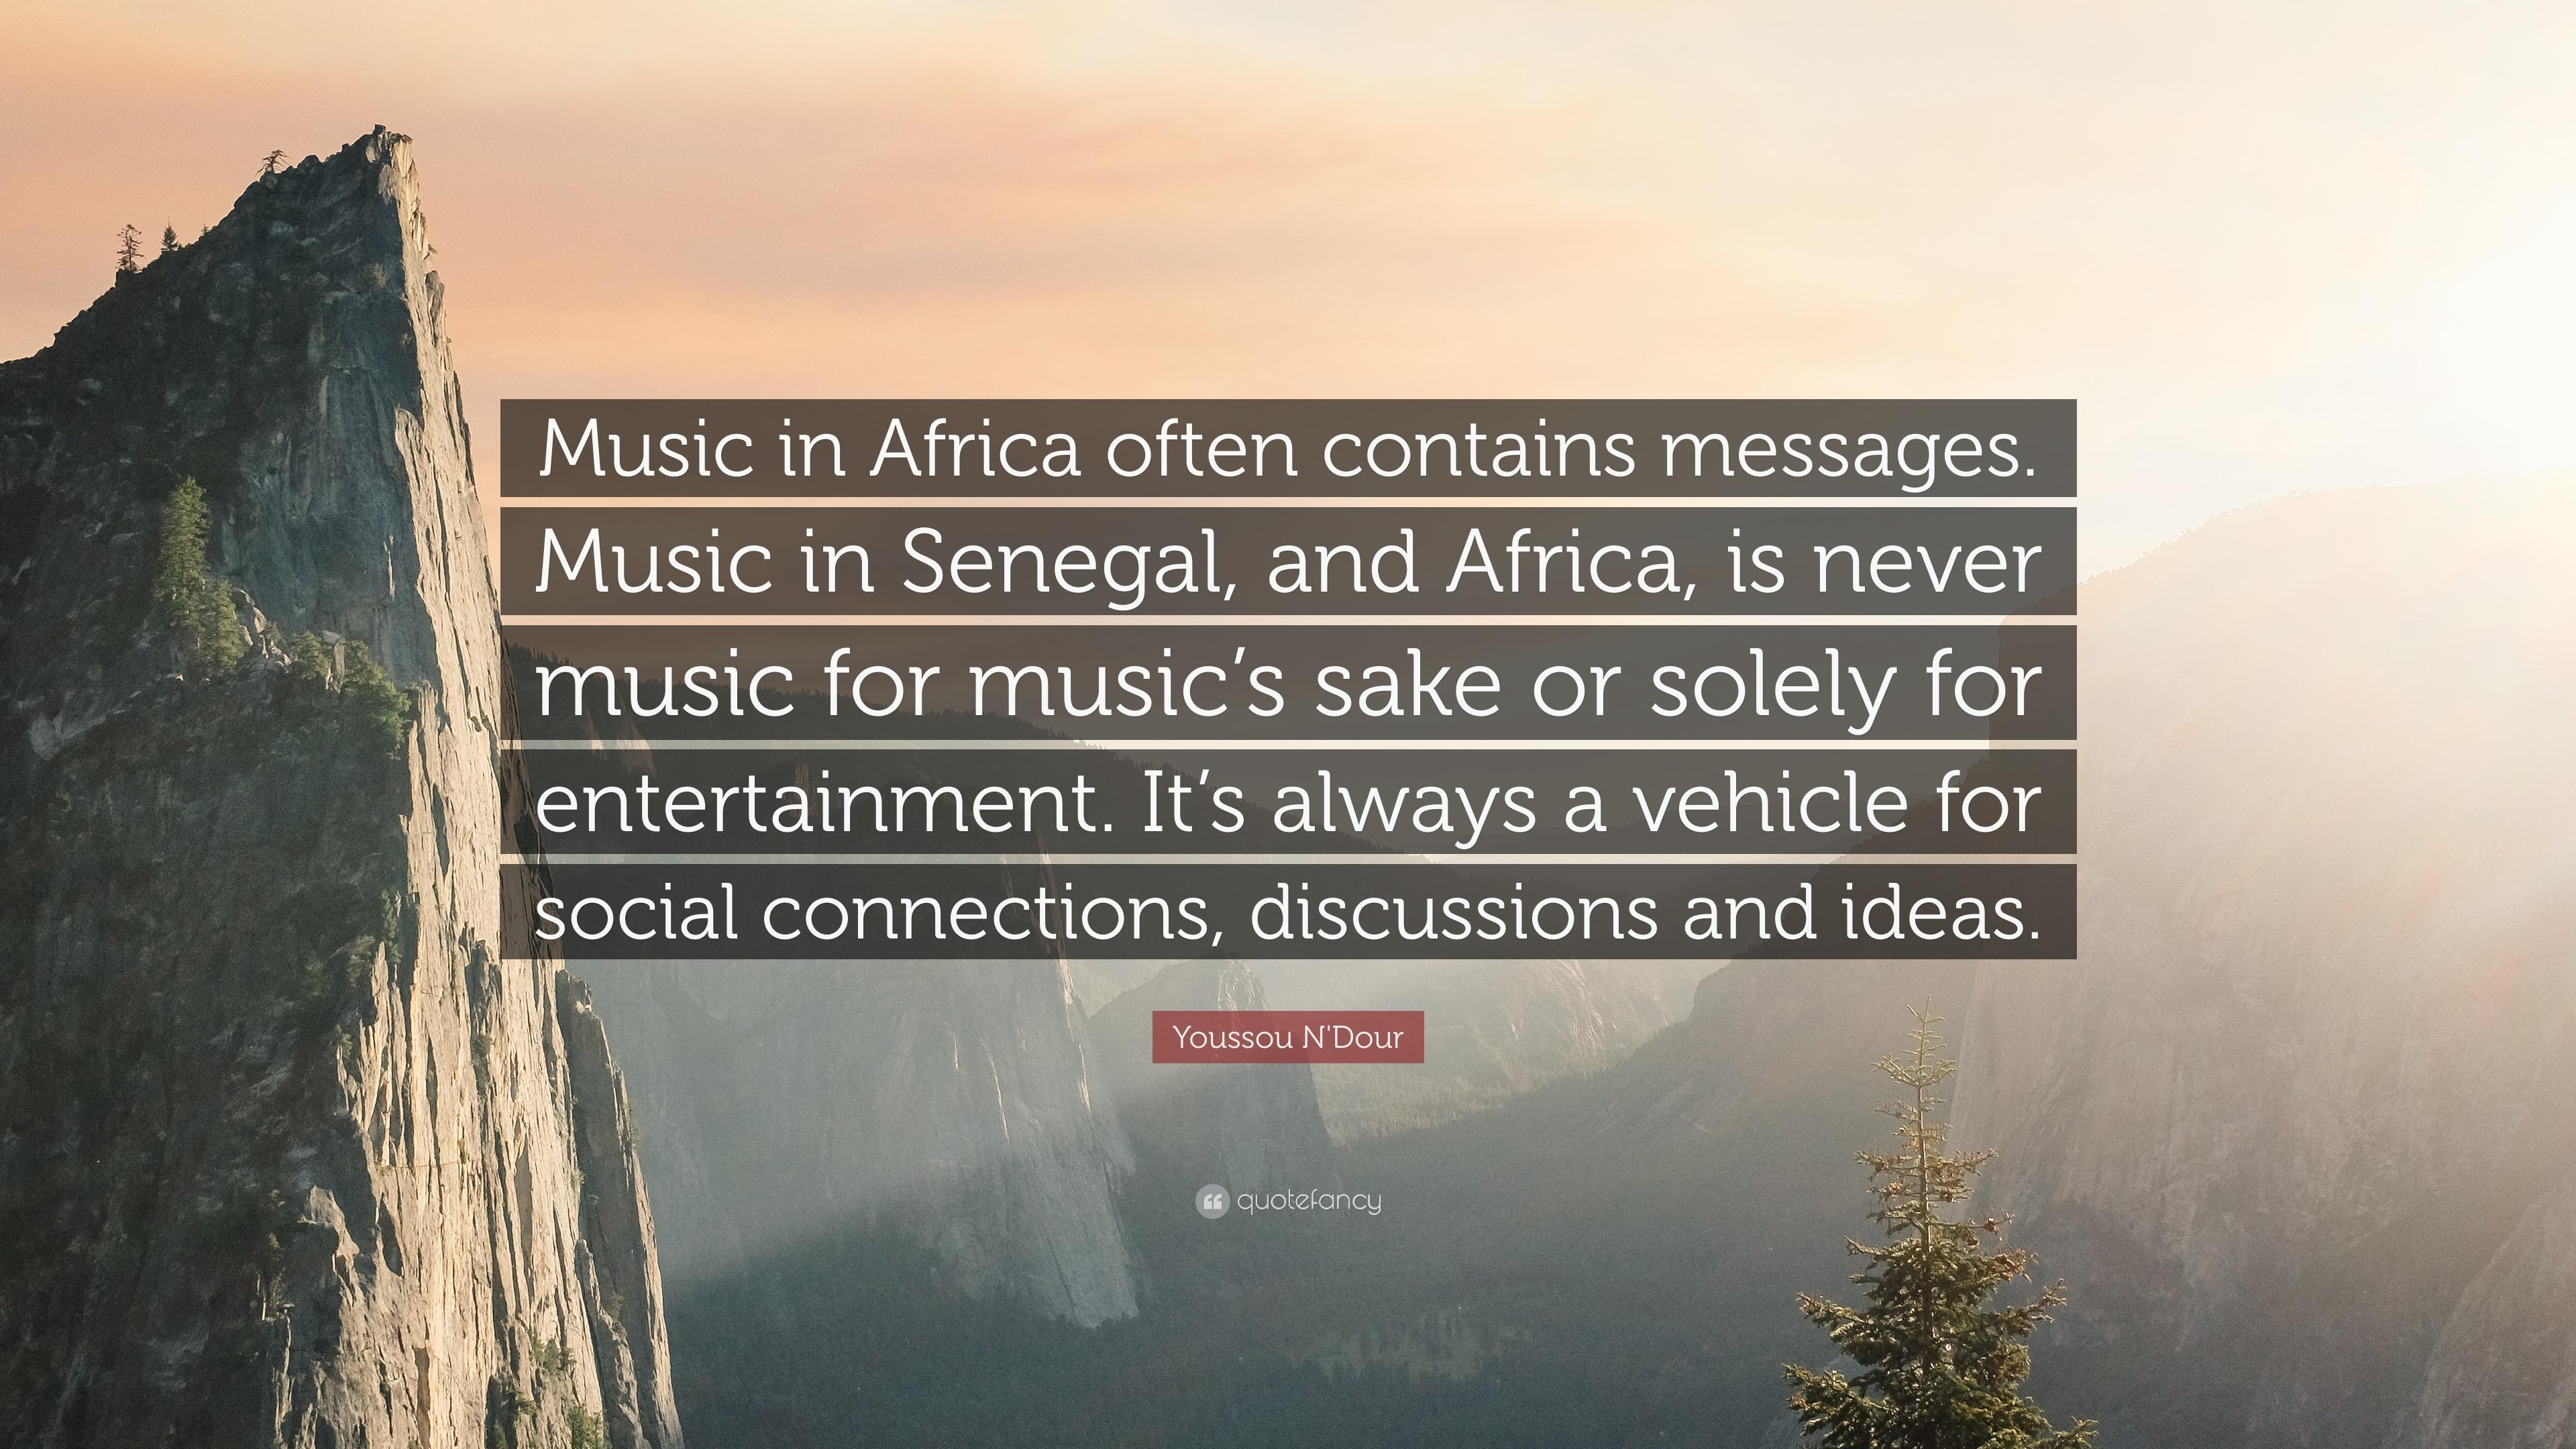 Youssou N'Dour Quote: “Music in Africa often contains messages